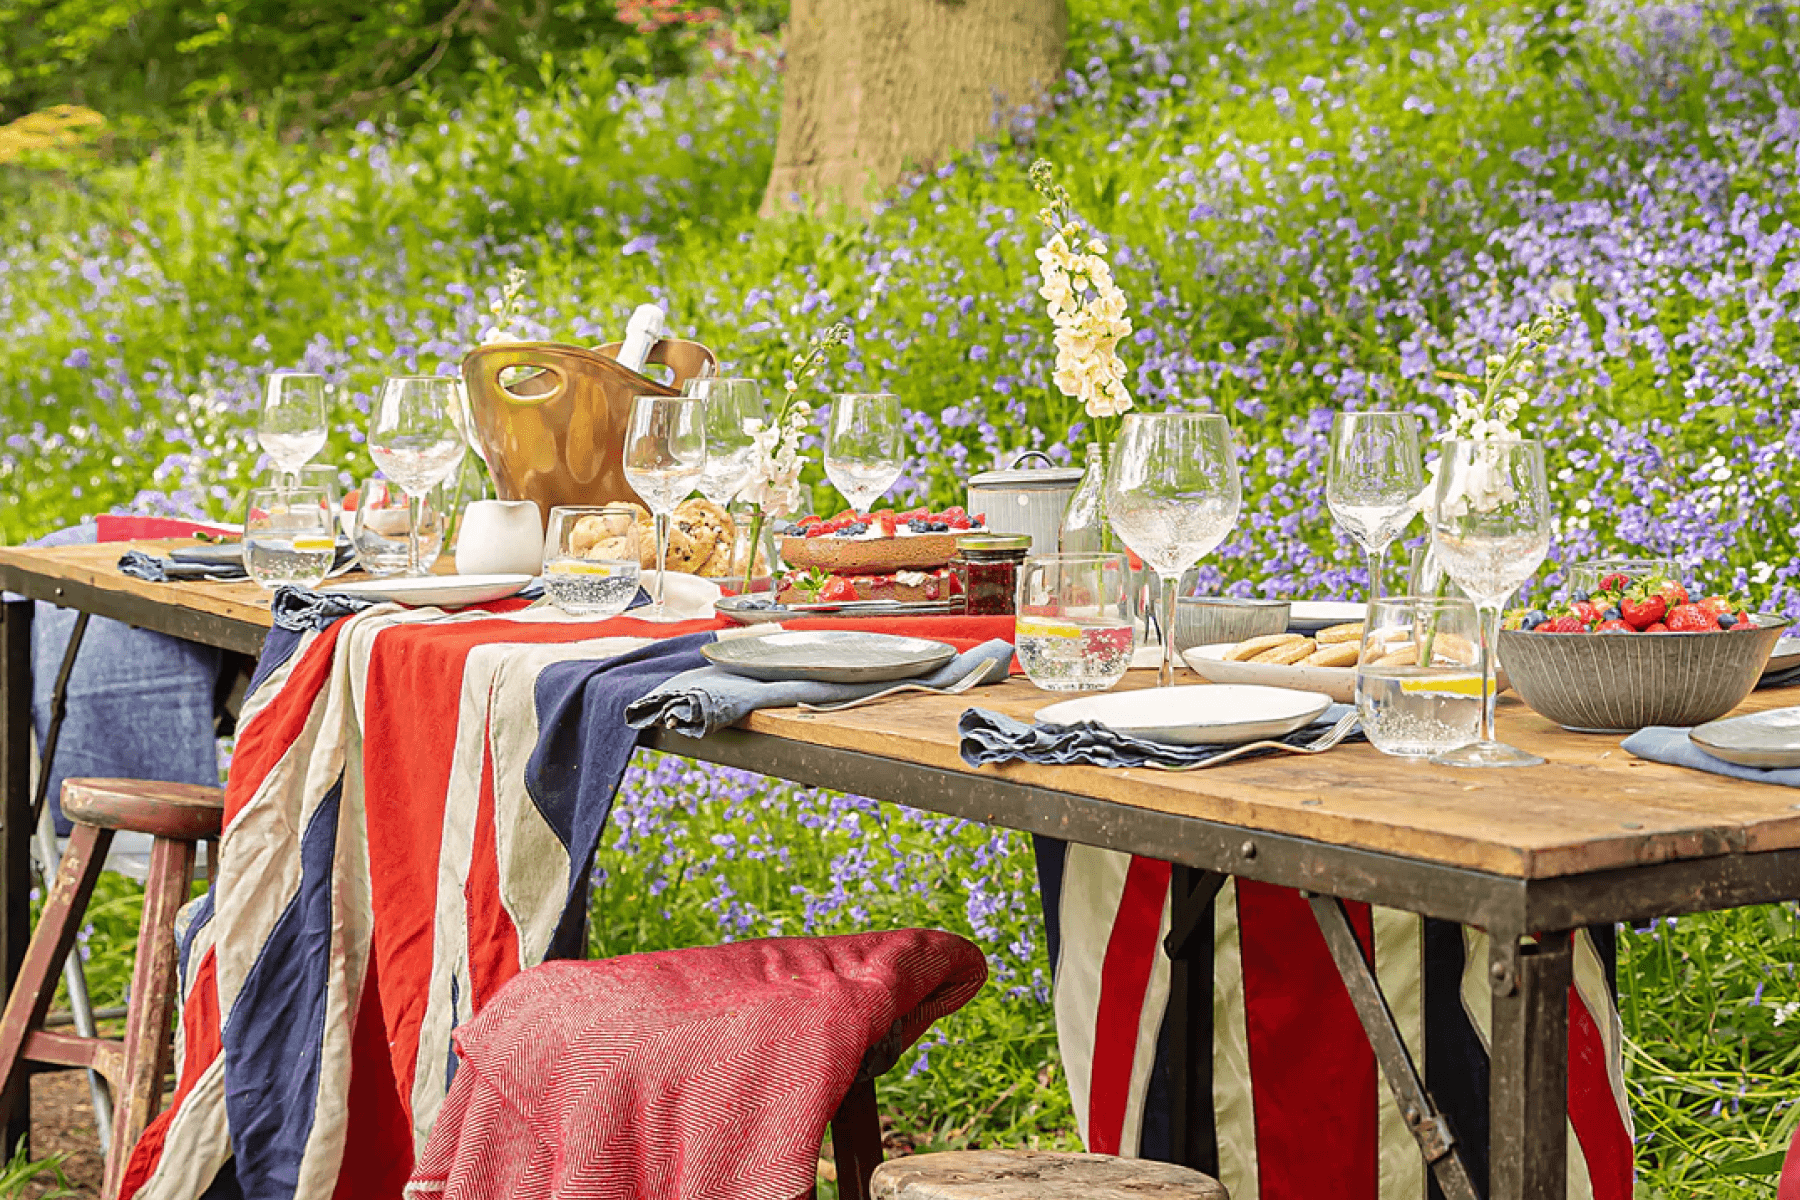 A rustic long table set with wine glasses and dishes is draped with a Union Jack flag in front of greenery and purple wildflowers.